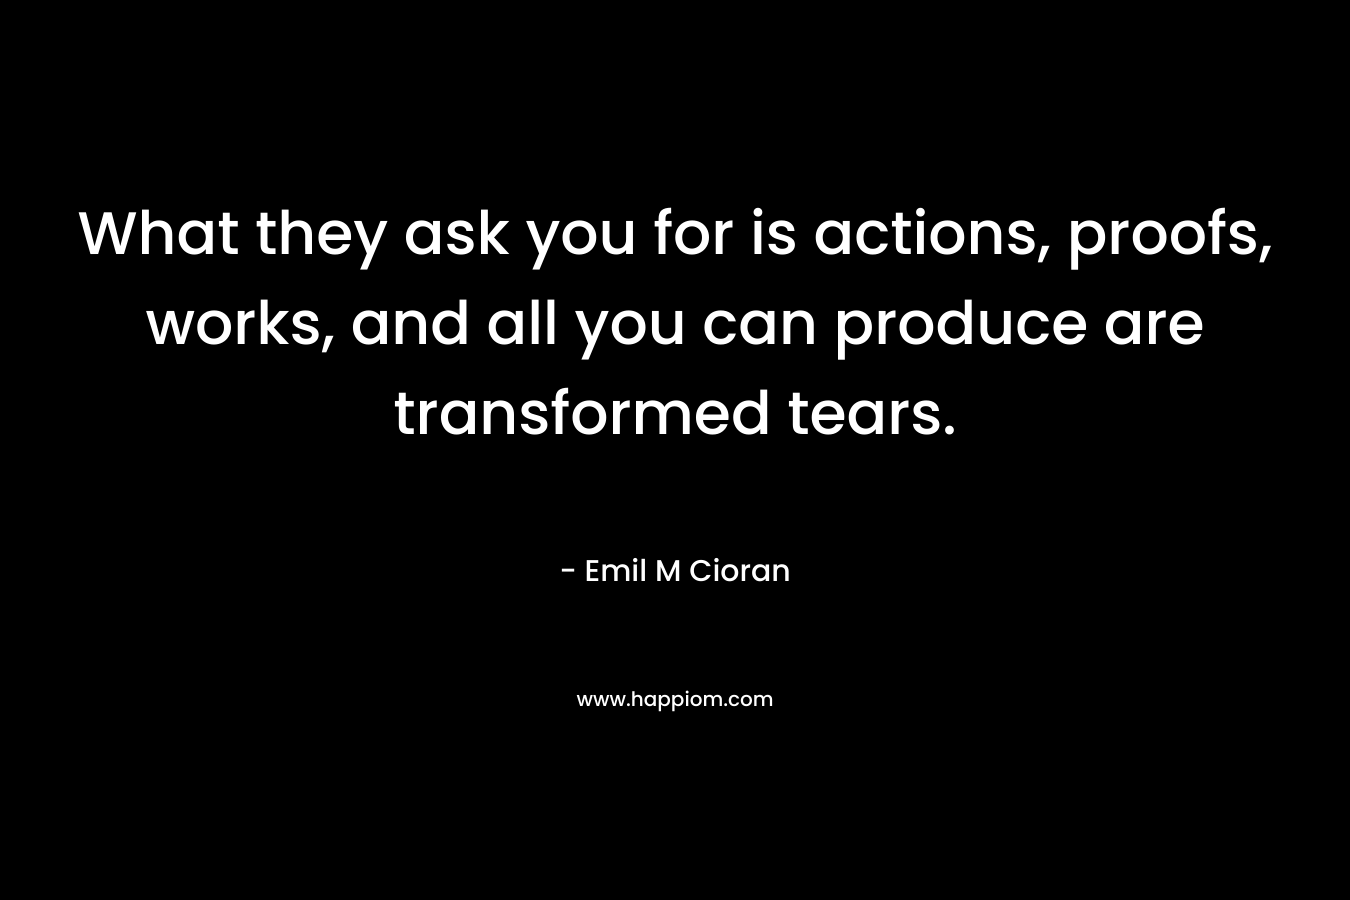 What they ask you for is actions, proofs, works, and all you can produce are transformed tears.